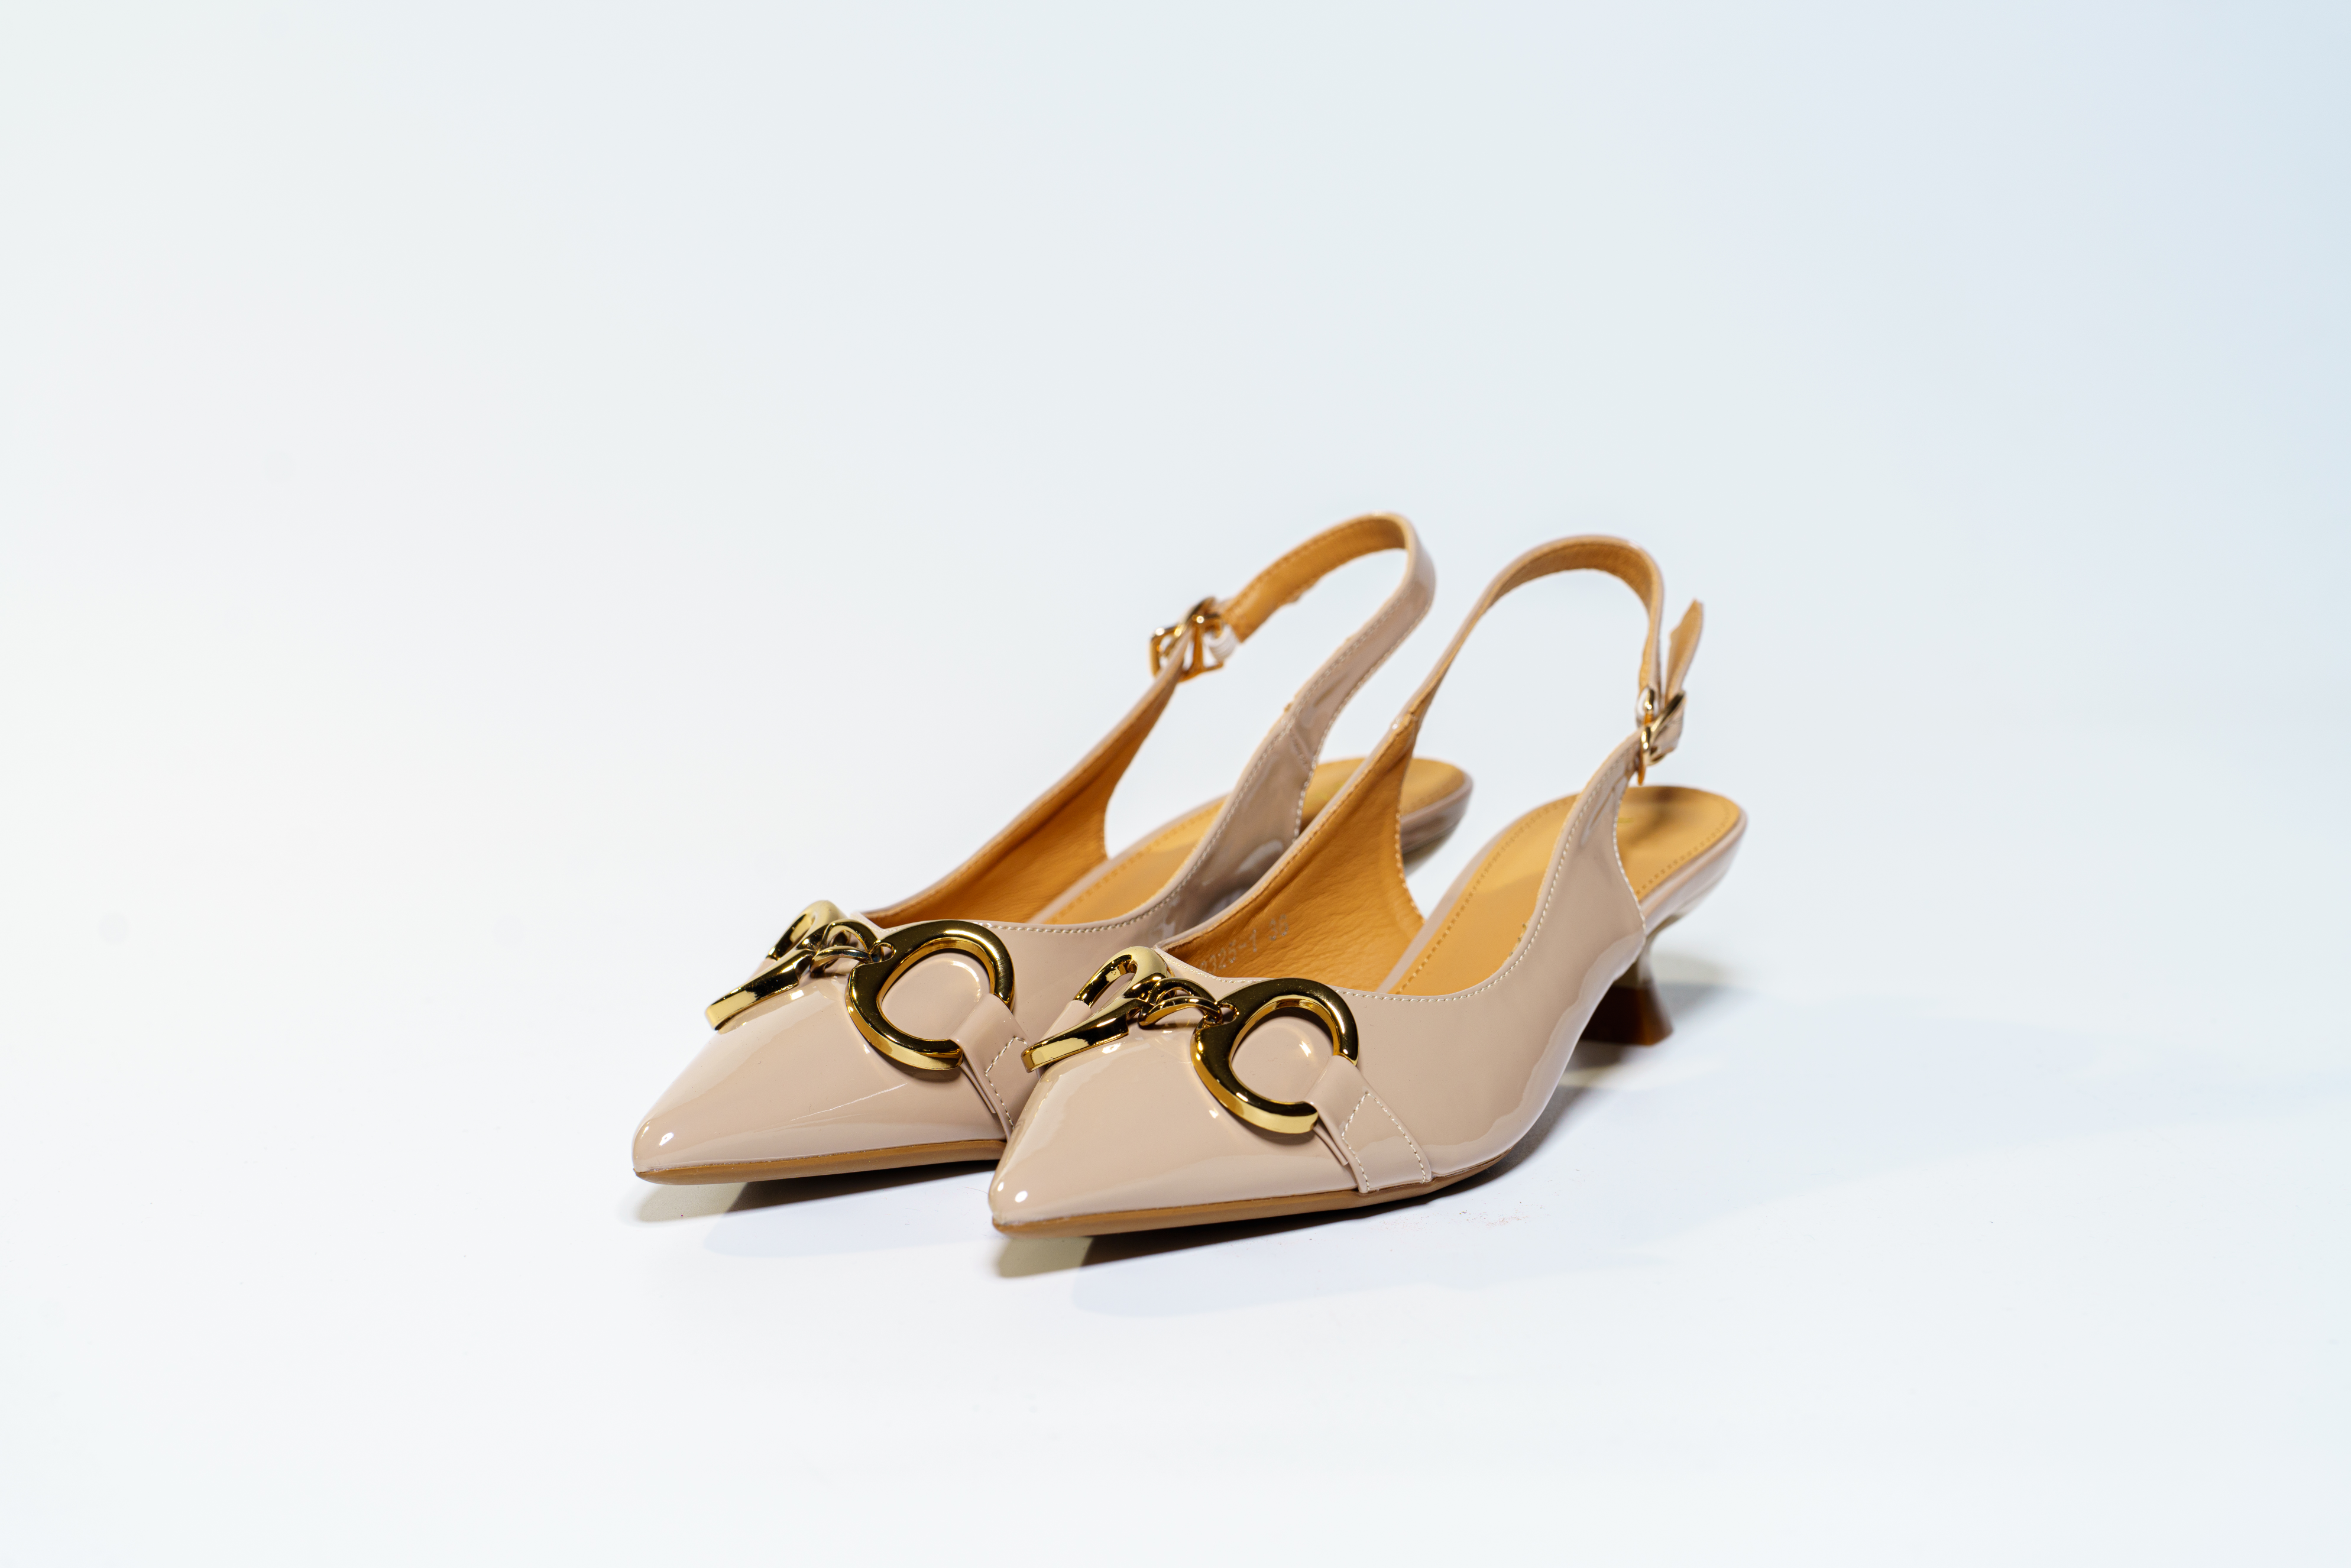 High-quality slingbacks in beige/khaki with a pointed toe, ideal for adding elegance to your outfit